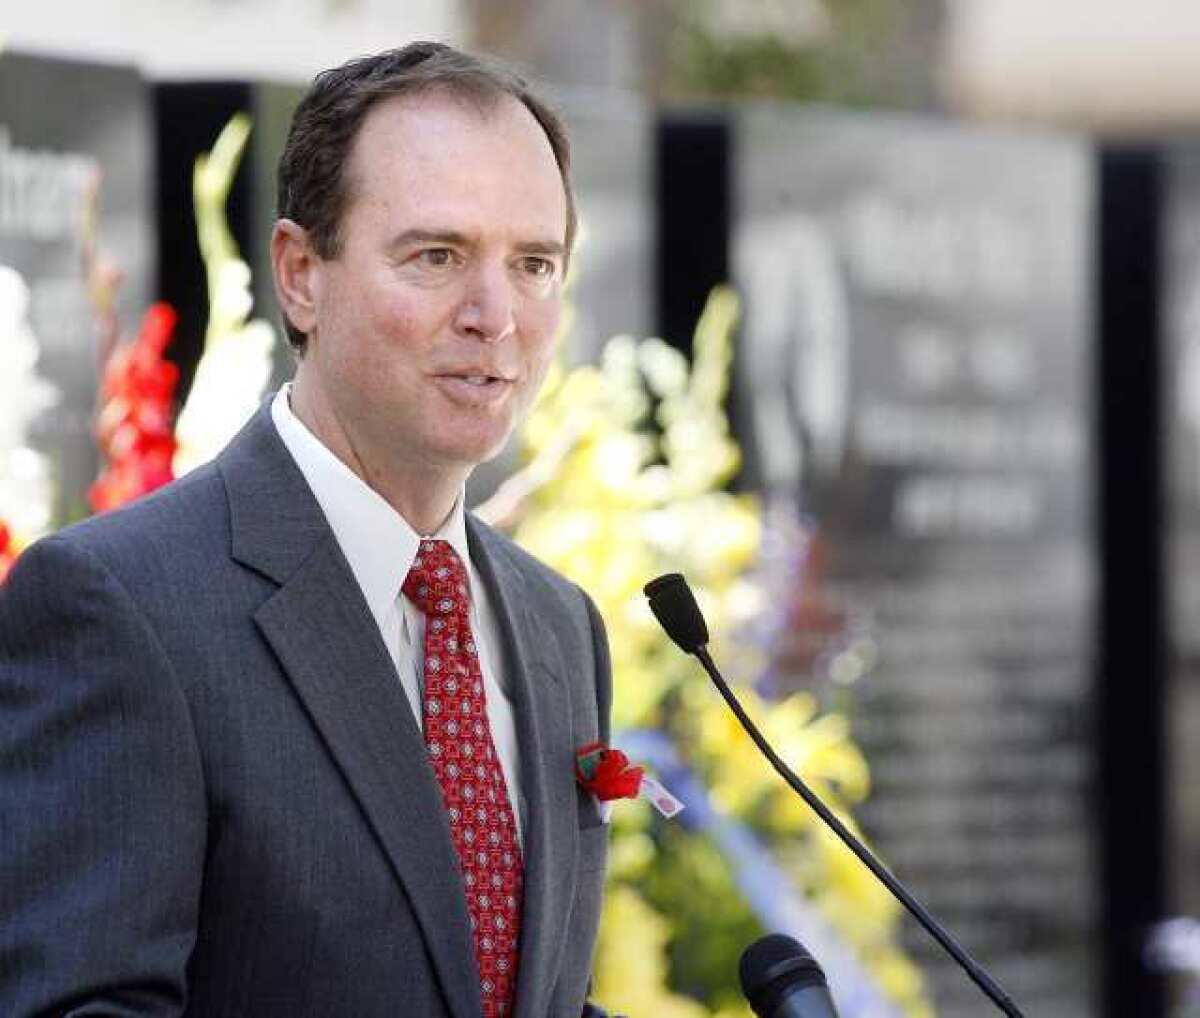 Rep. Adam Schiff (D-Burbank)at a Memorial Day event in Glendale last month. Schiff called Thursday's ruling "the correct legal decision."